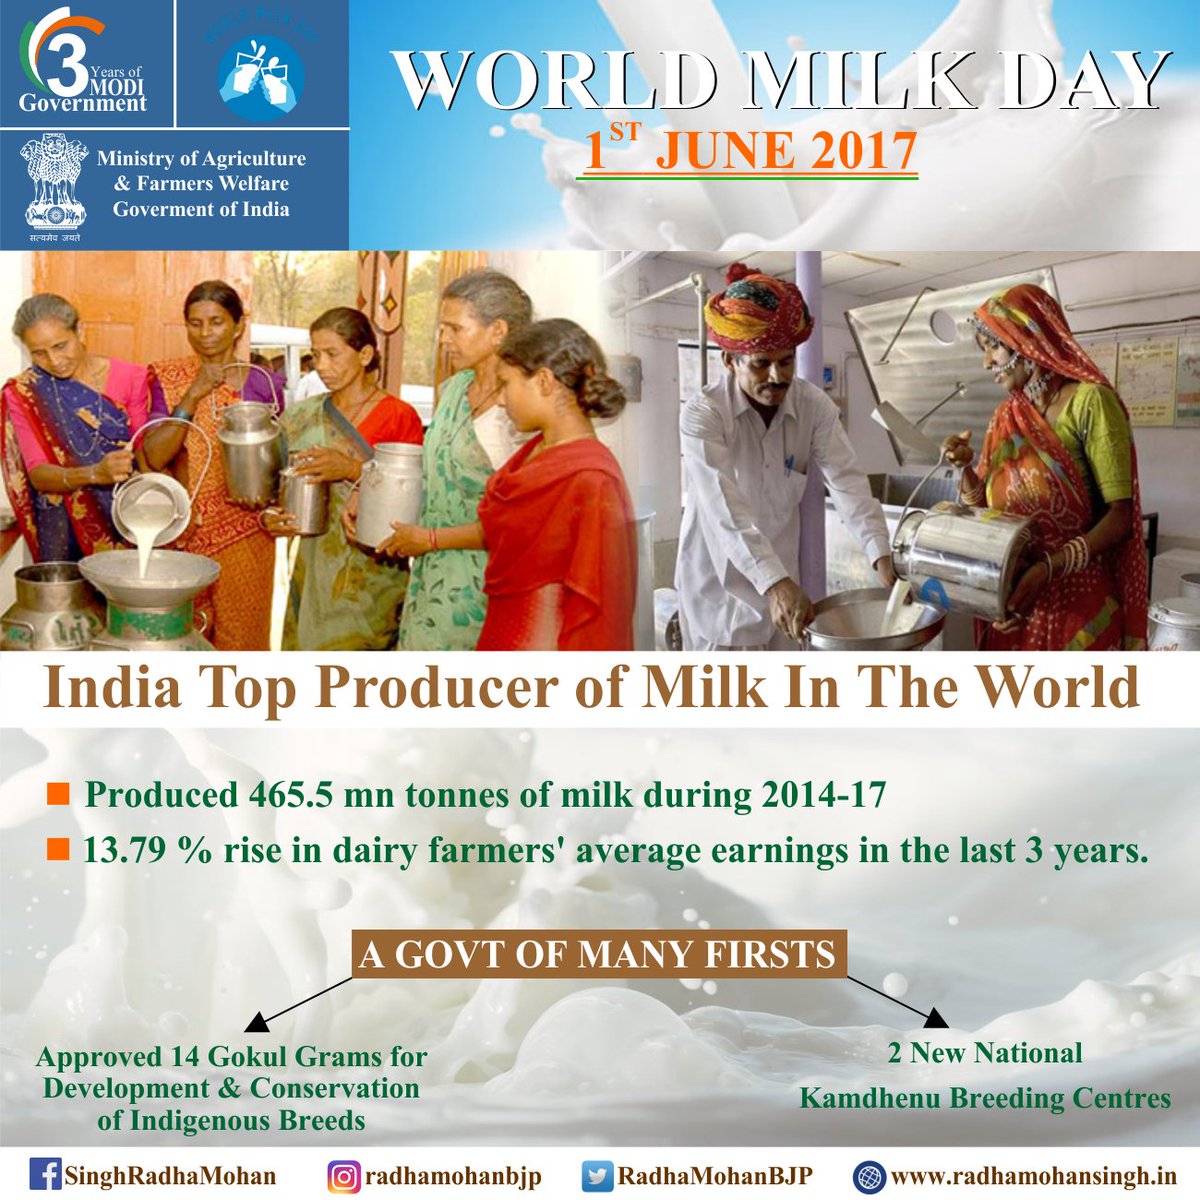 #DoYouKnow  : The Indian #dairy market is amongst the the largest & fastest growing markets in the world.
#MilkProcessing #worldmilkday2017